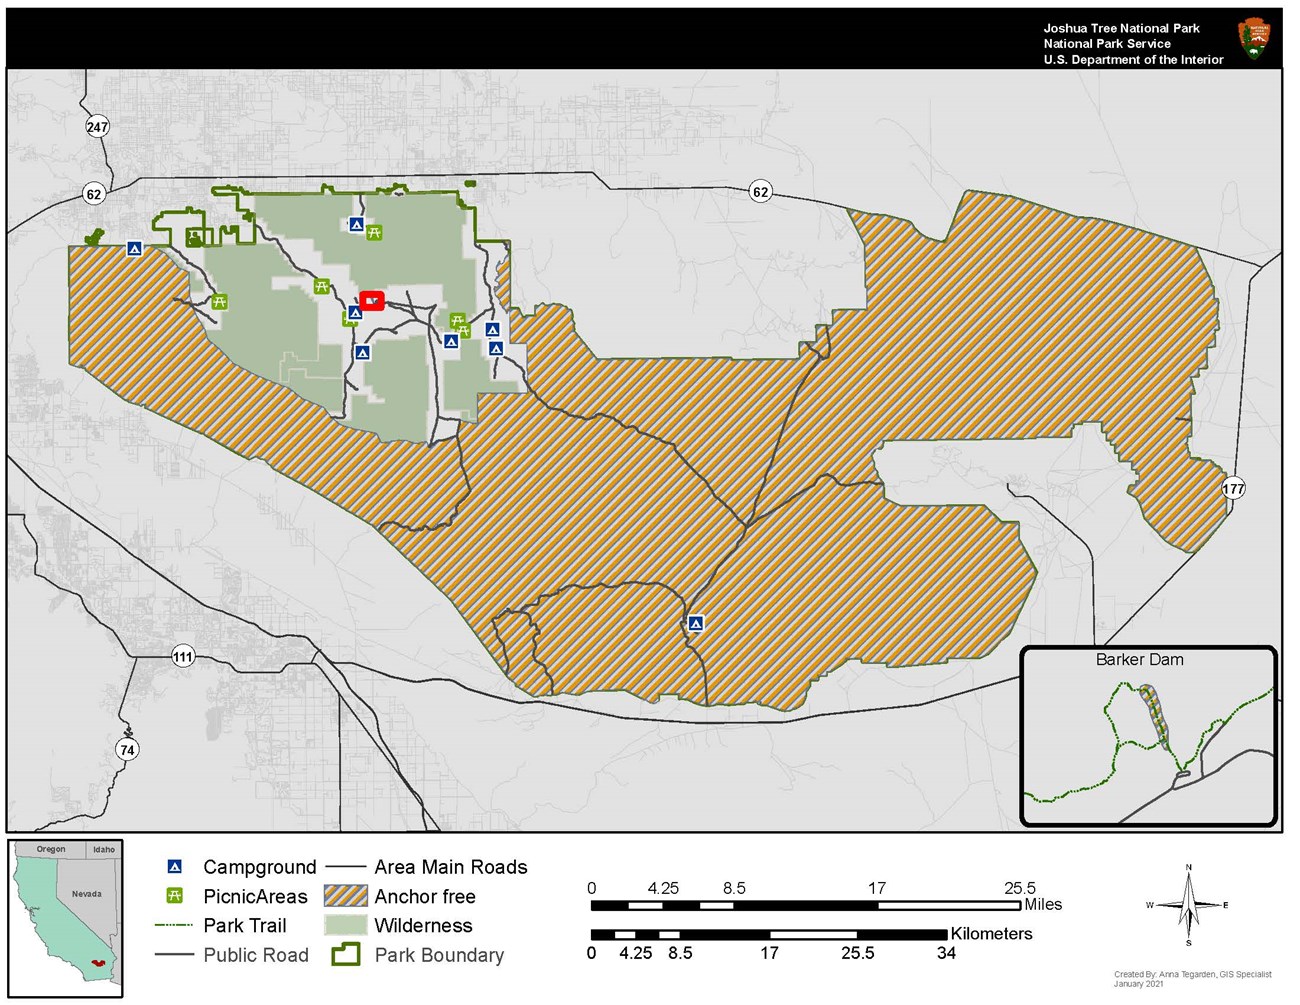 A map showing the anchor free zones in Joshua Tree National Park and the wilderness areas in the anchor zone. Most of the park is an anchor free zone. Anchor free areas include the entire east half and south half of the park and a section in the west side